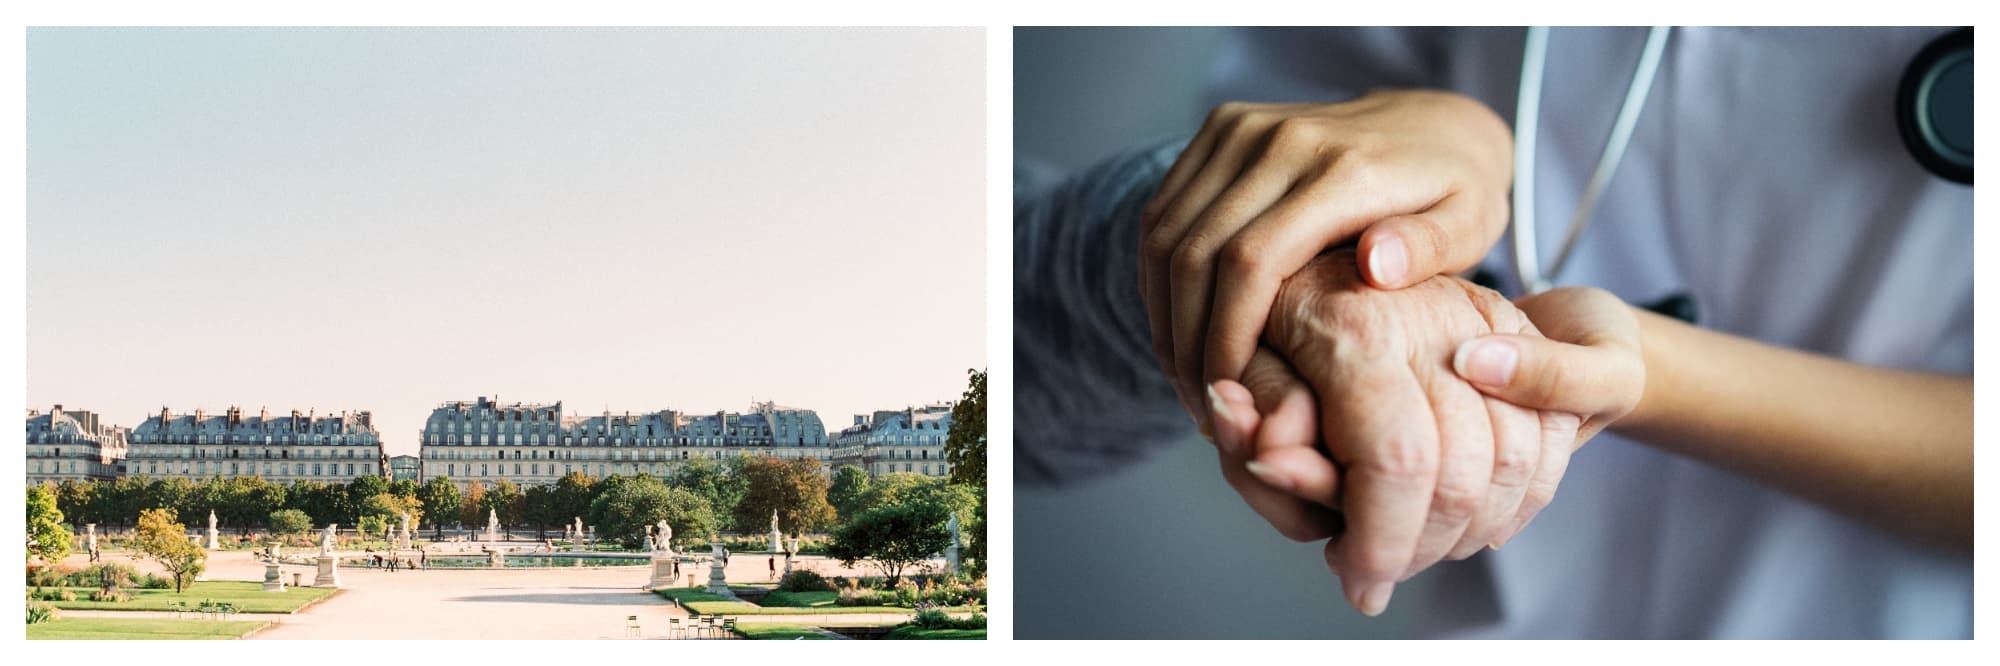 On the left: The sun illuminates the Jardin des Tuileries as people mill around the central fountain by the Louvre. On the left: A doctor gently applies pressure to a patient's hand to perform an evaluation. 